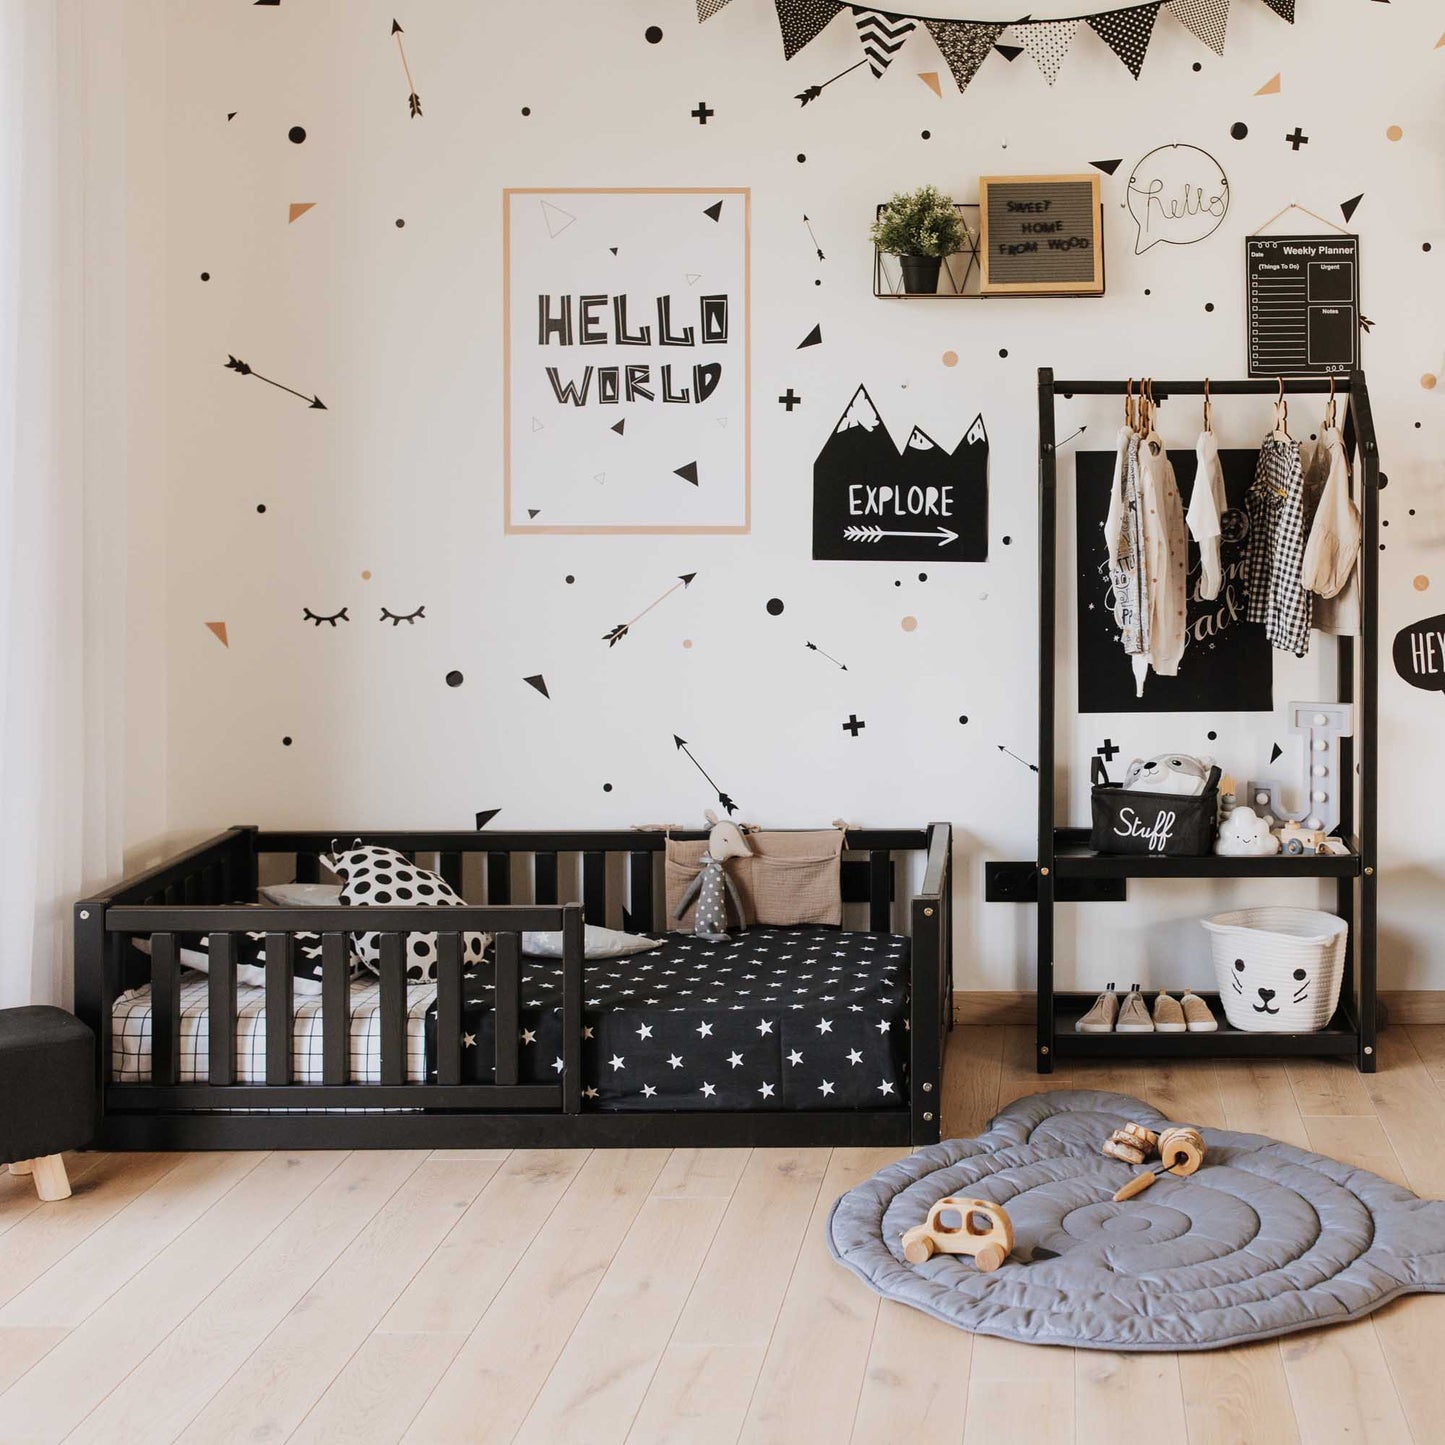 A child's room with the Sweet Home From Wood 2-in-1 toddler bed on legs with a vertical rail fence, featuring black and white decor with polka dots.